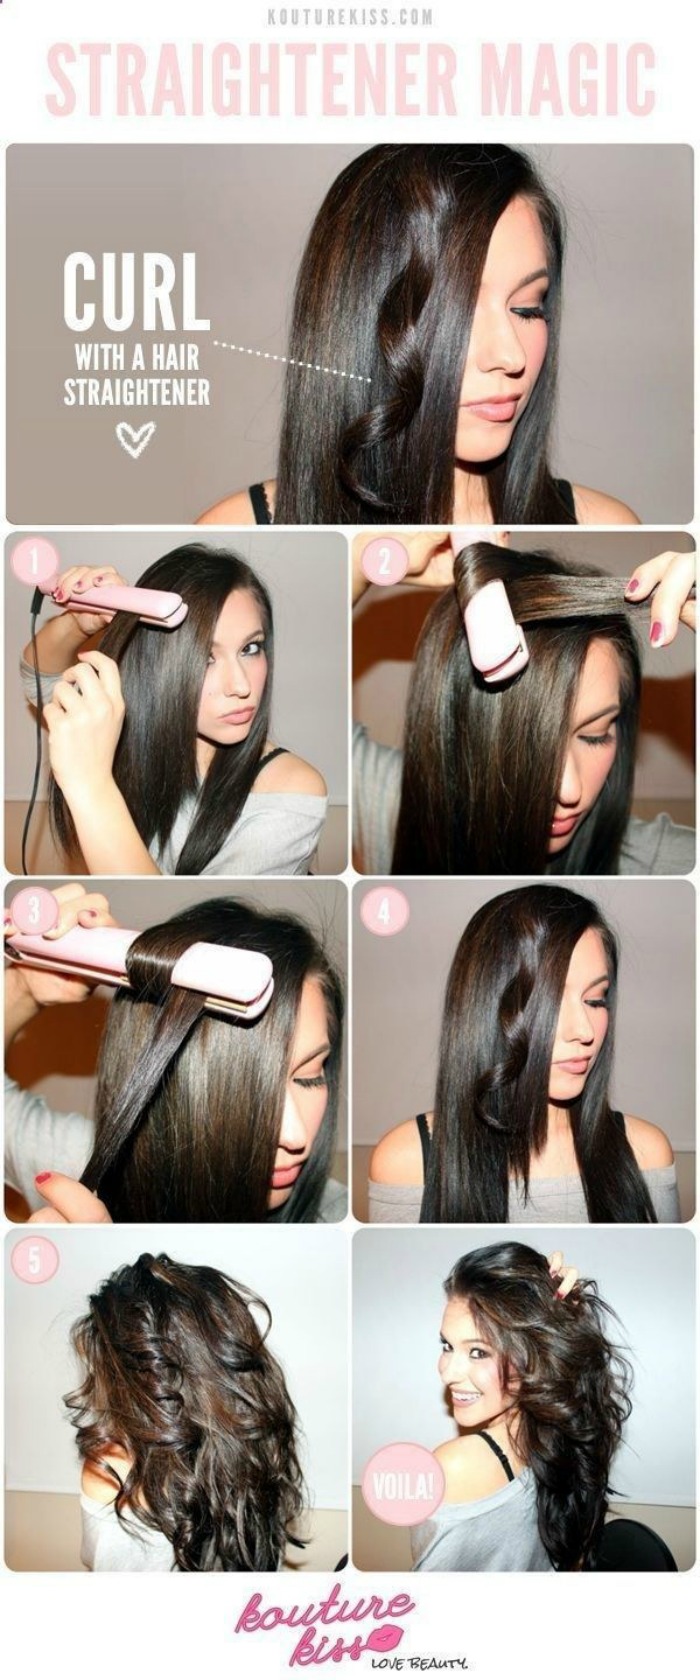 Curling with a Straightener